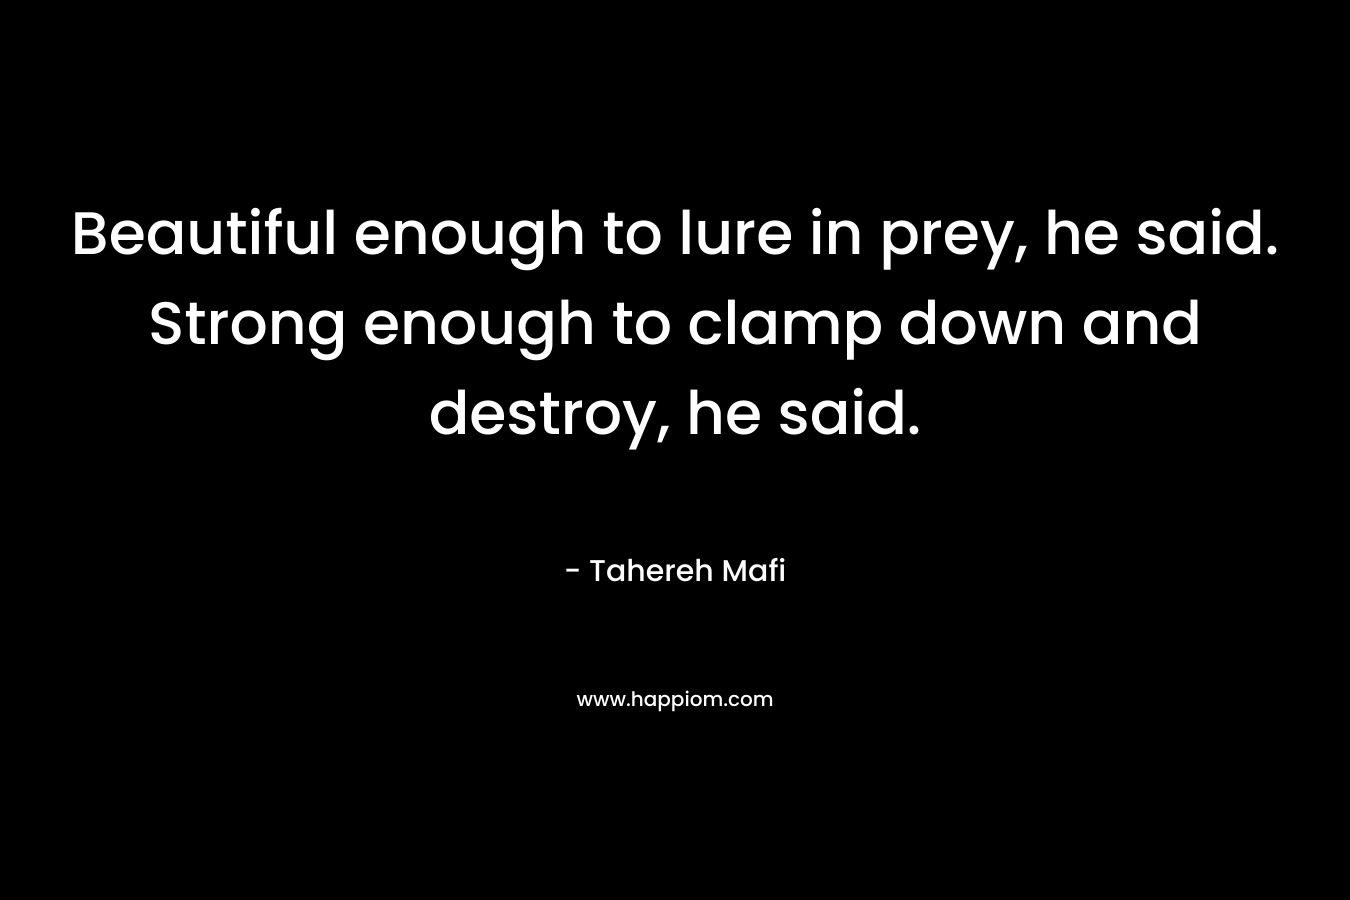 Beautiful enough to lure in prey, he said. Strong enough to clamp down and destroy, he said.